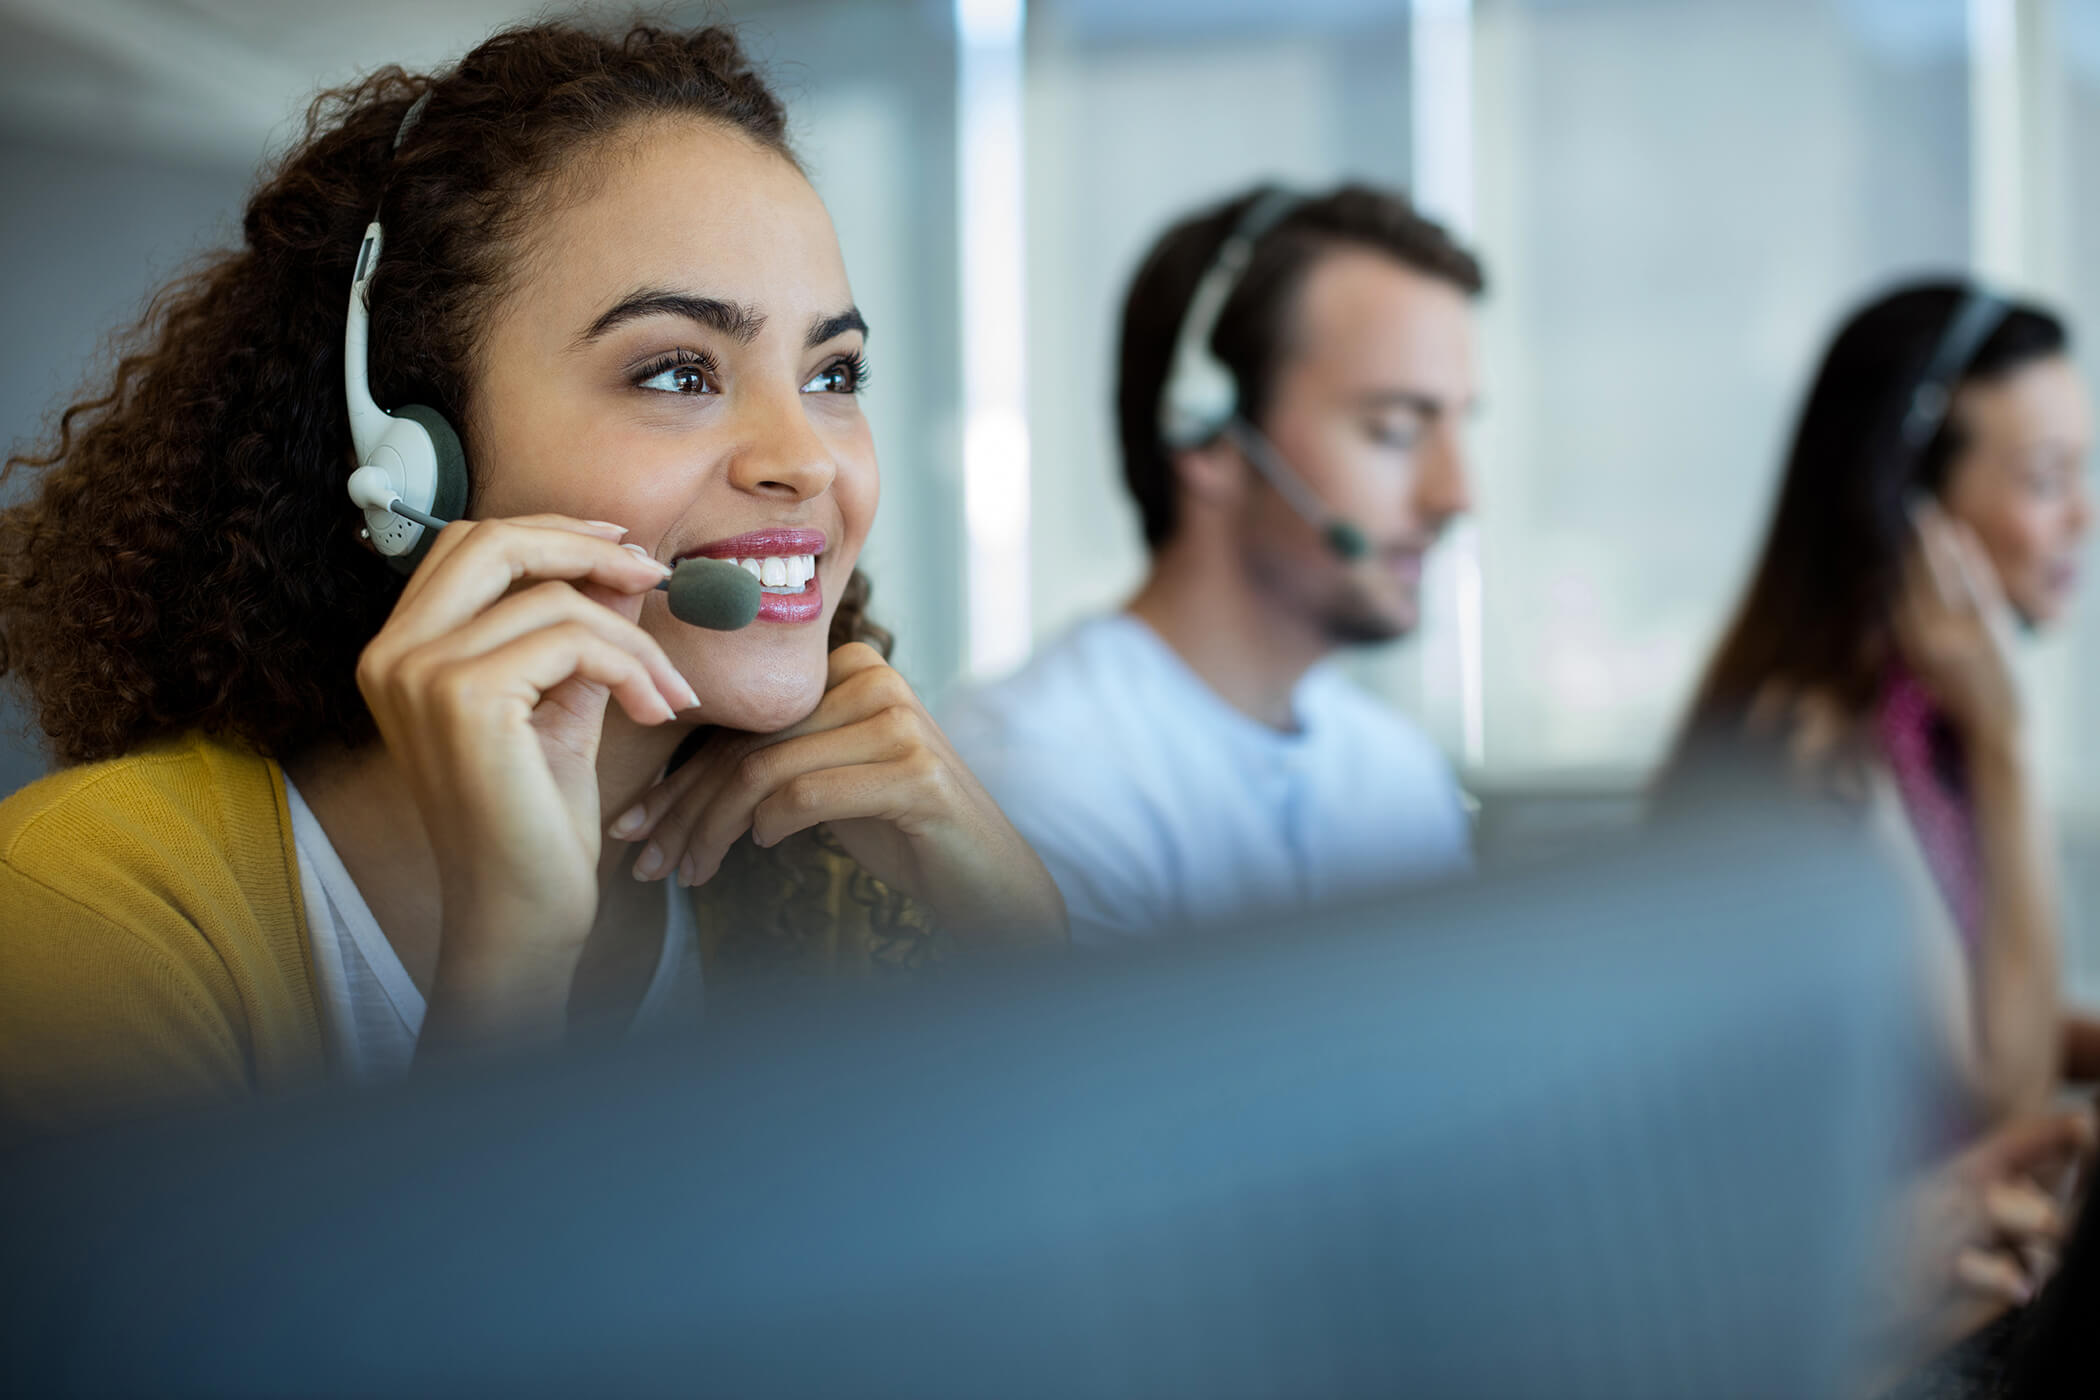  A smiling customer service representative wearing a headset is talking on the phone while two other customer service representatives work in the background.